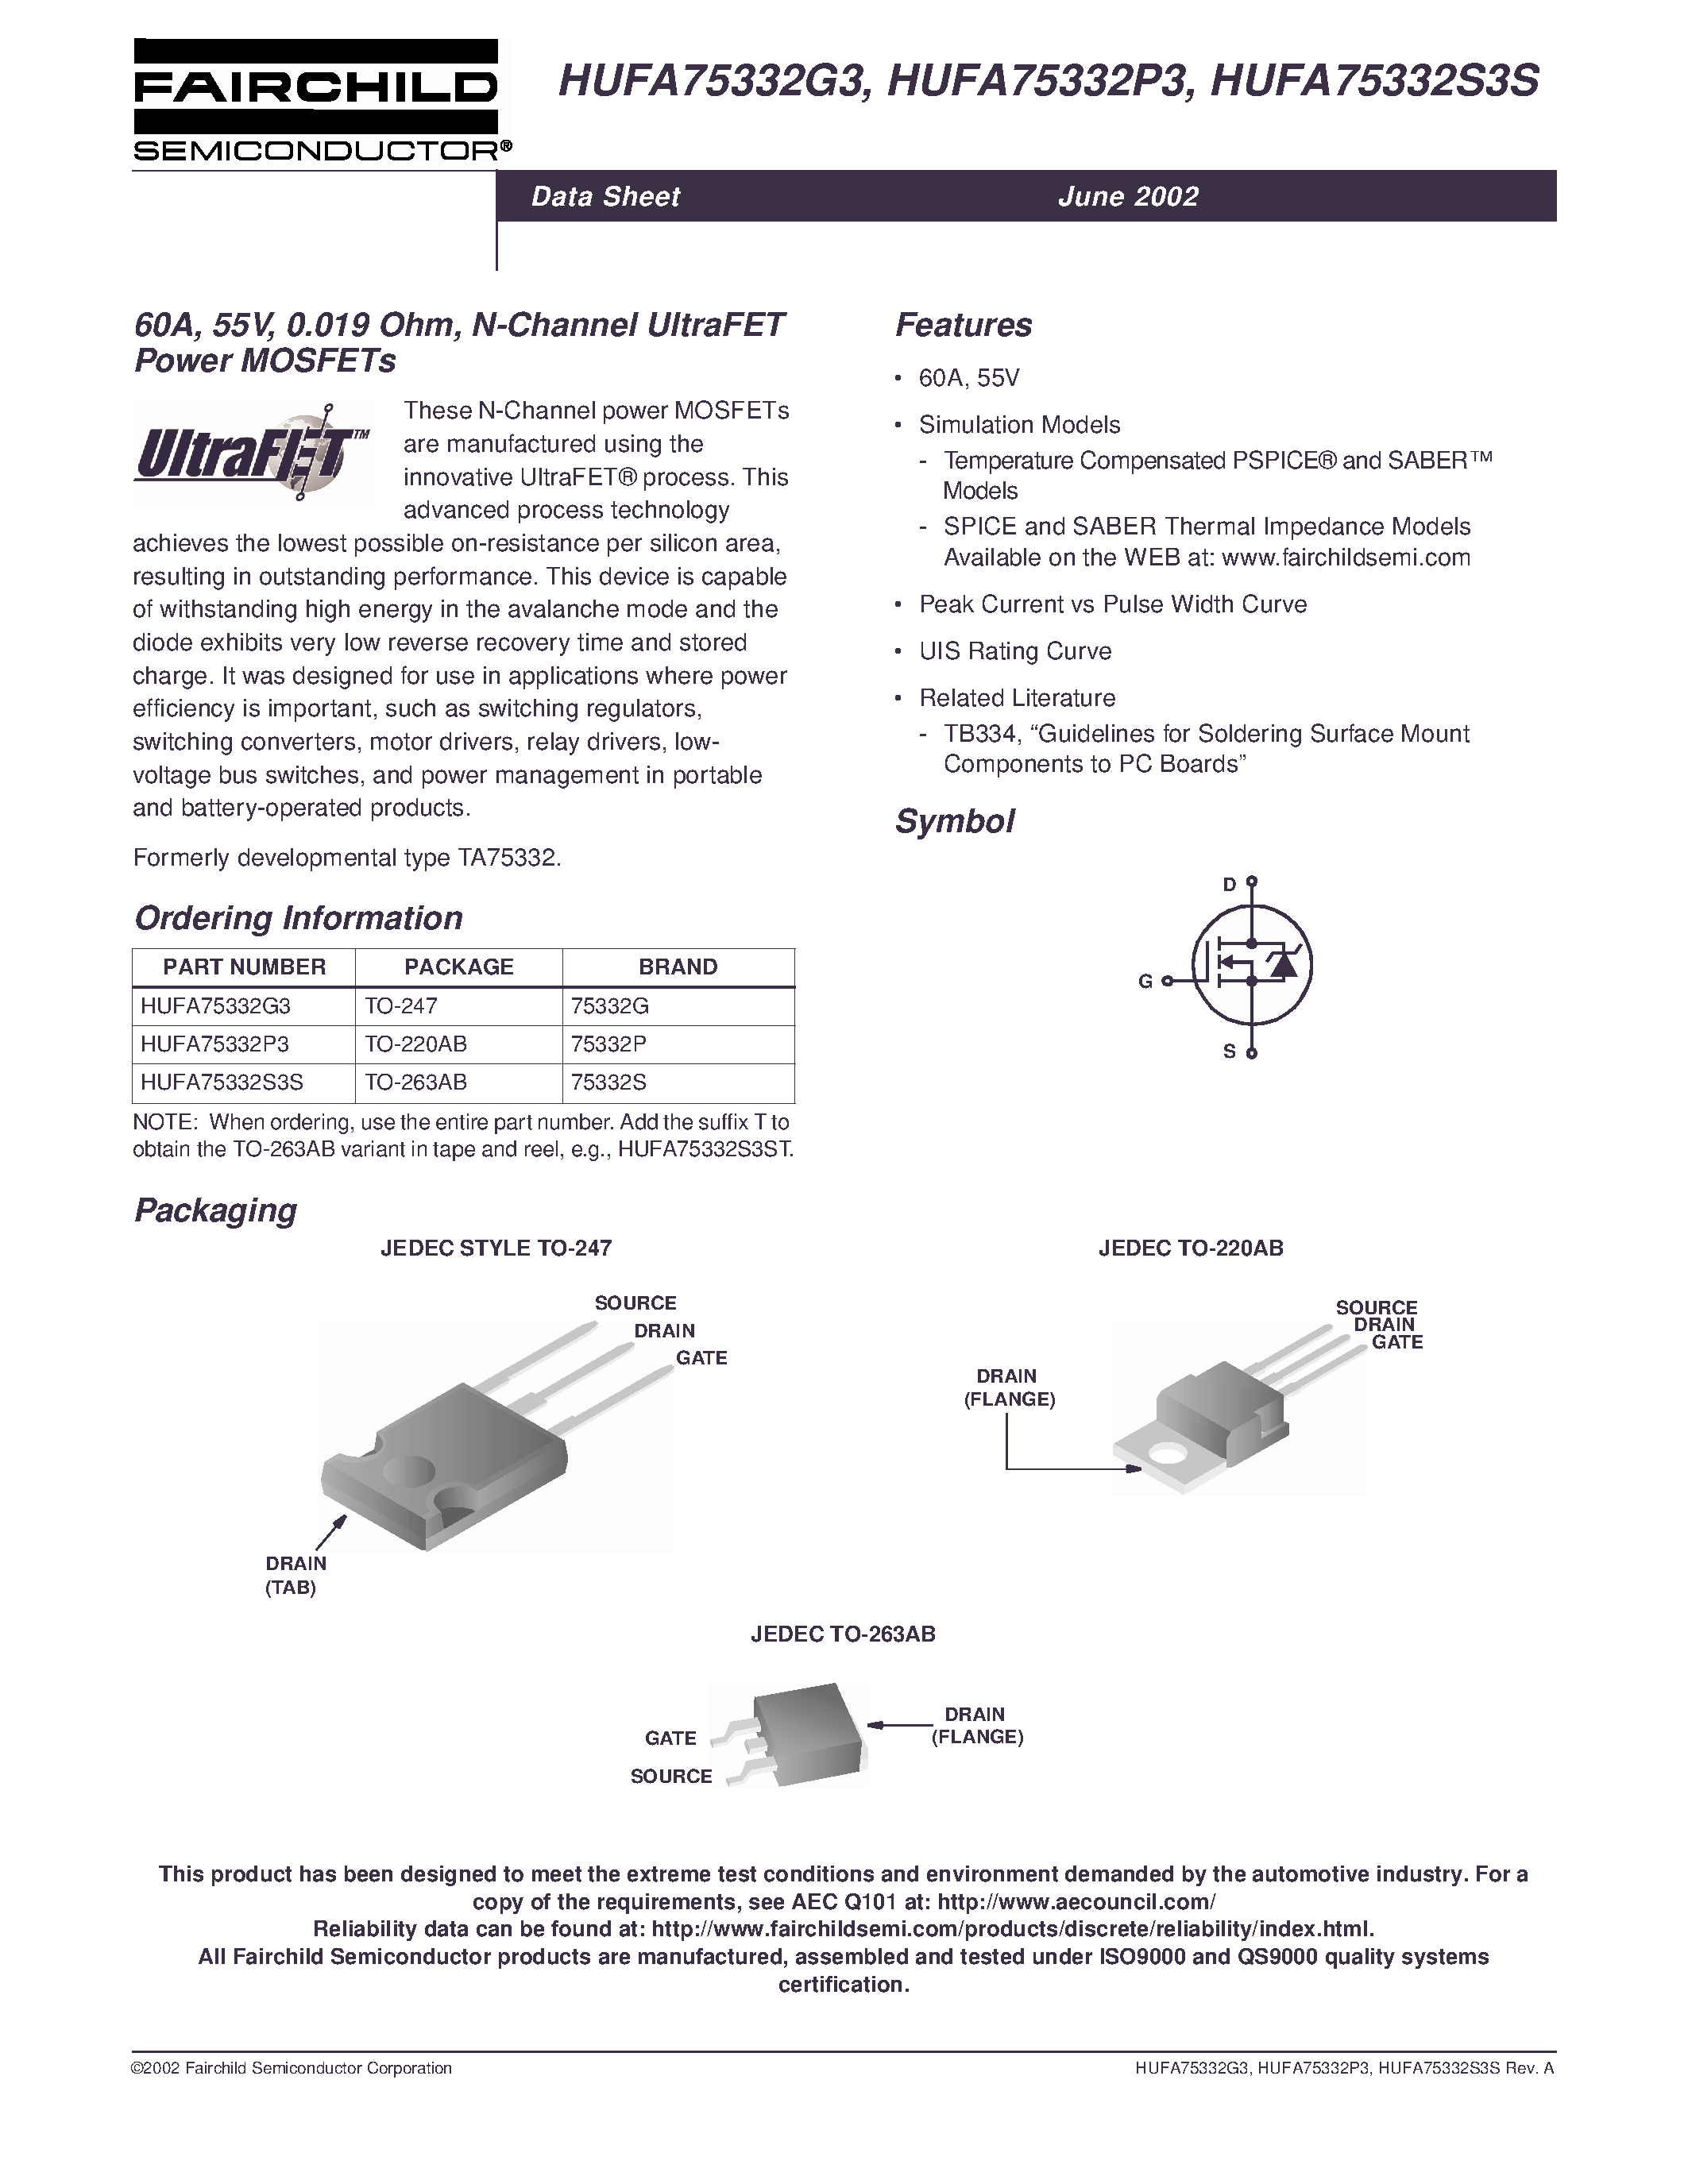 Datasheet HUFA75333S3S - 66A/ 55V/ 0.016 Ohm. N-Channel UltraFET Power MOSFETs page 1